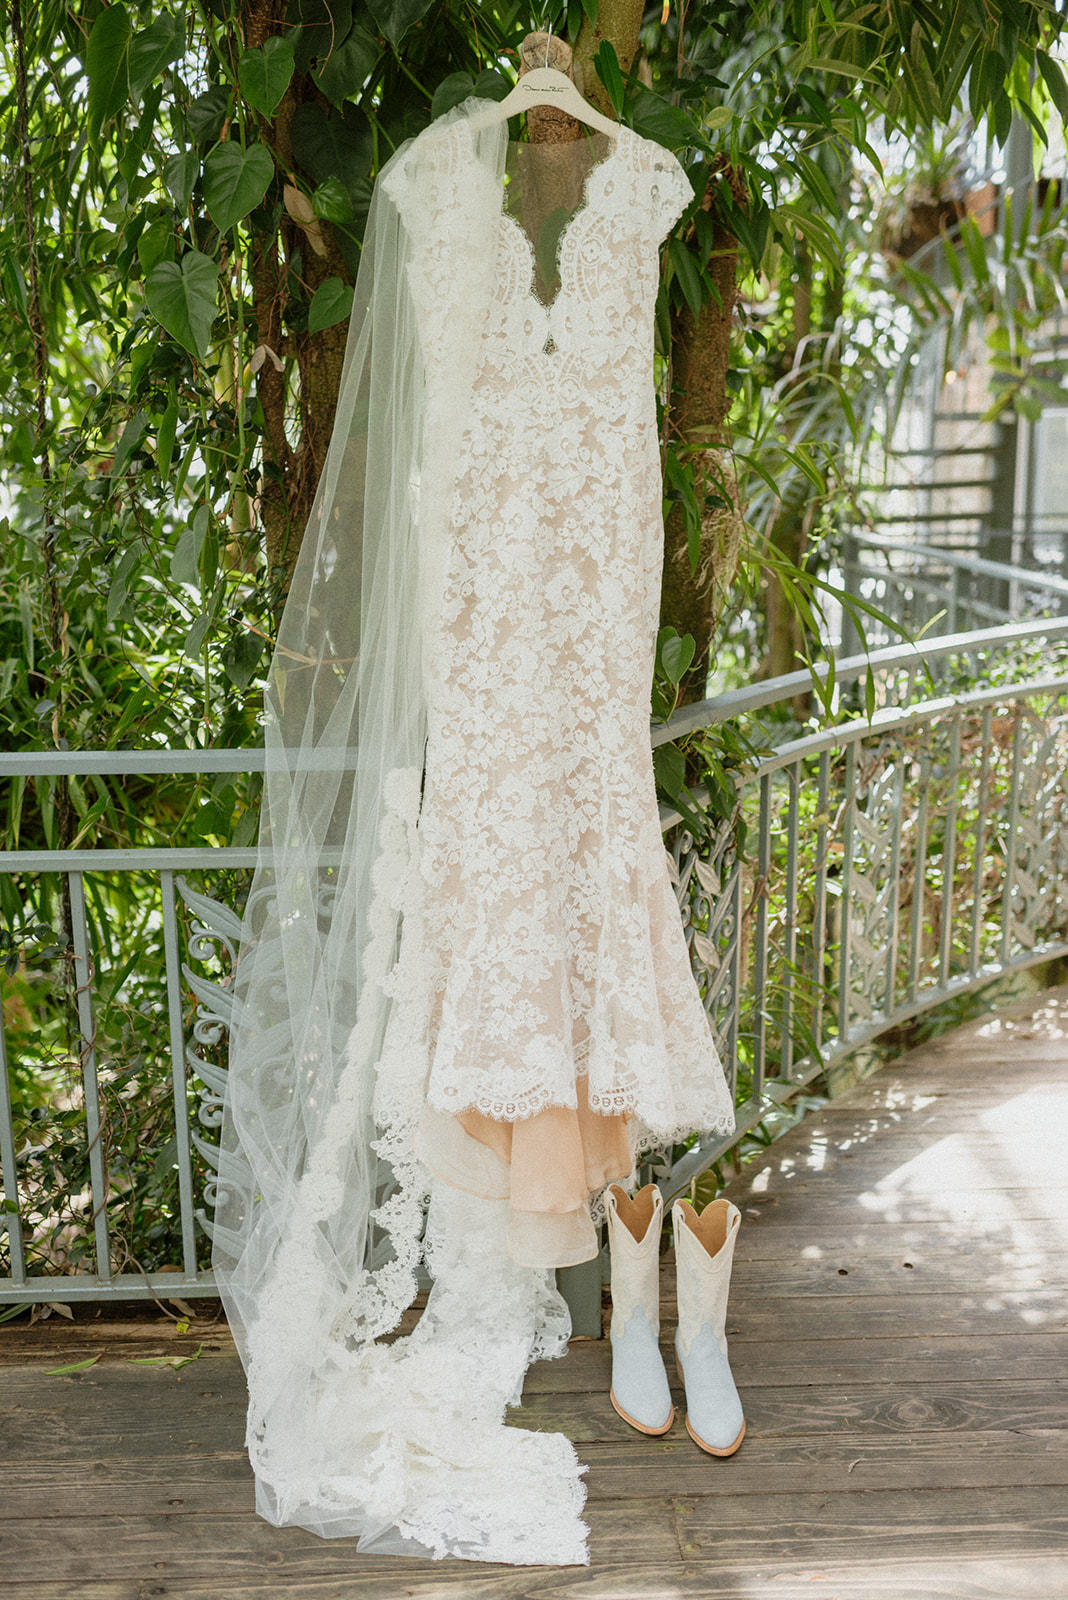 Lace wedding dress and Texas bride details